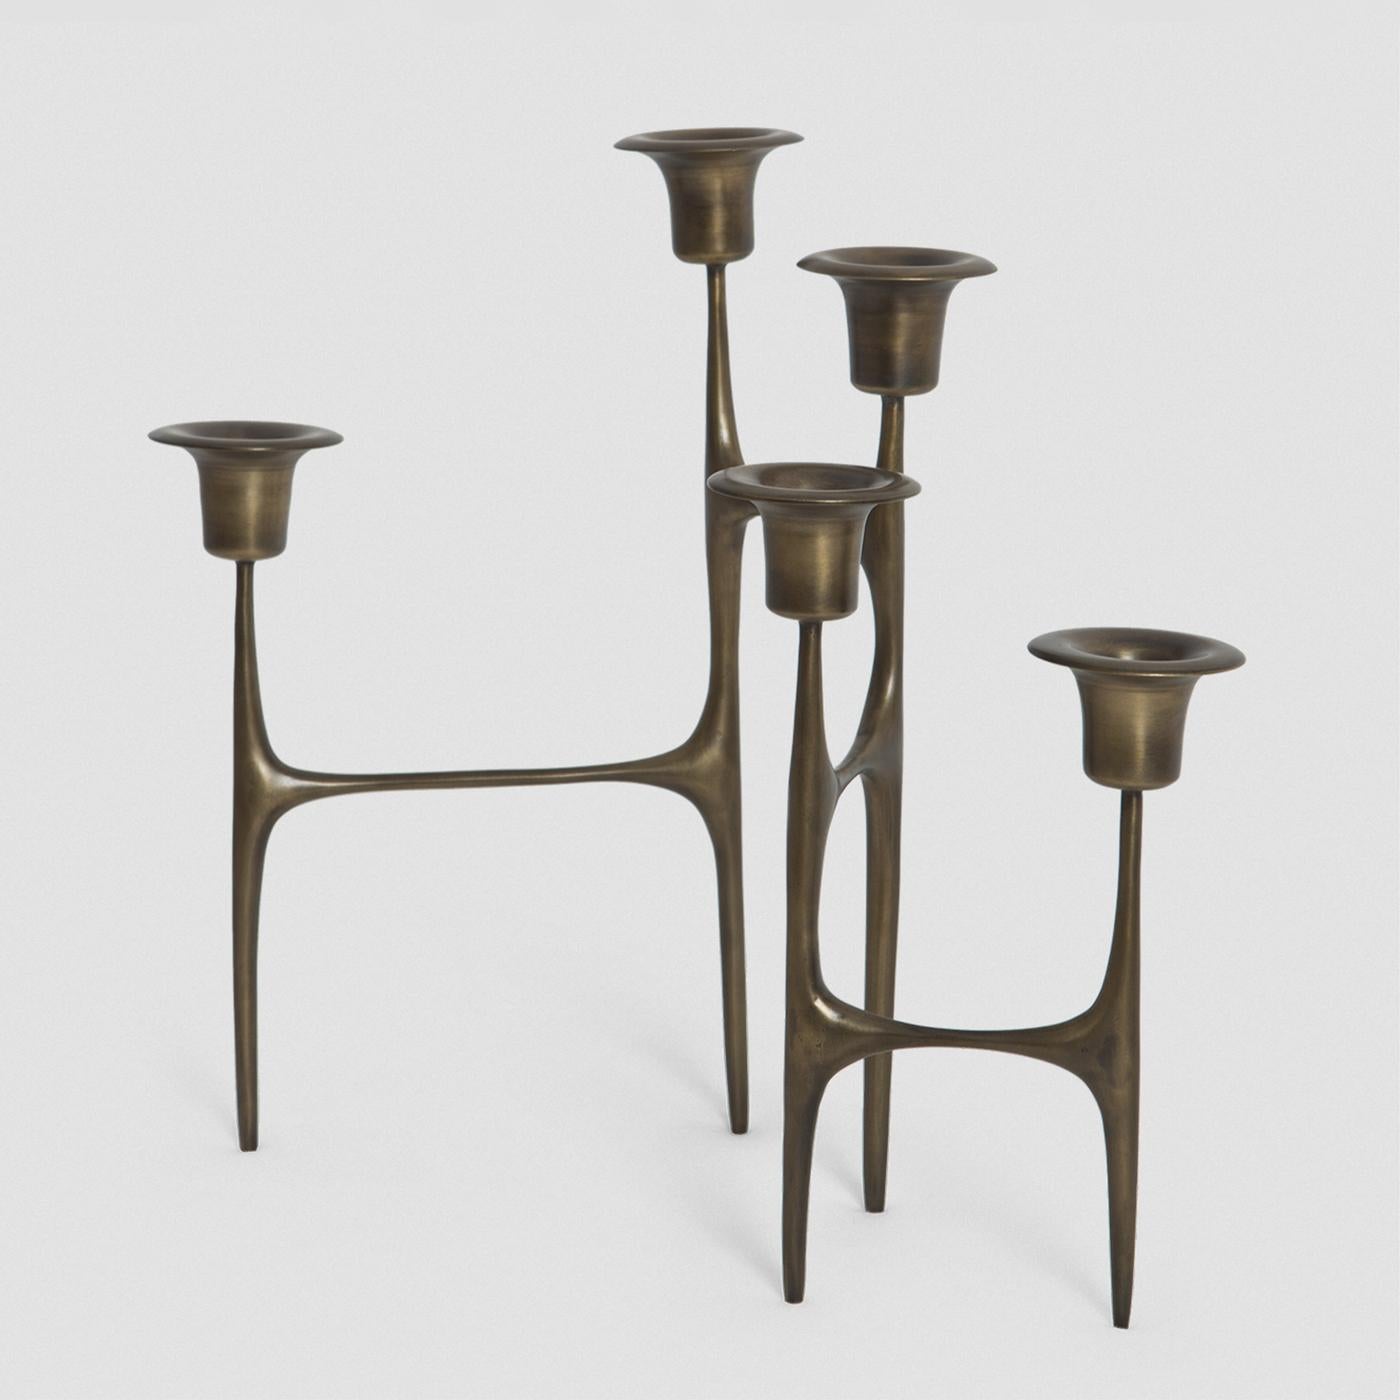 Candleholder five flames with structure in solid
brass in antique finish. For 5 candlesticks (candle
not included).